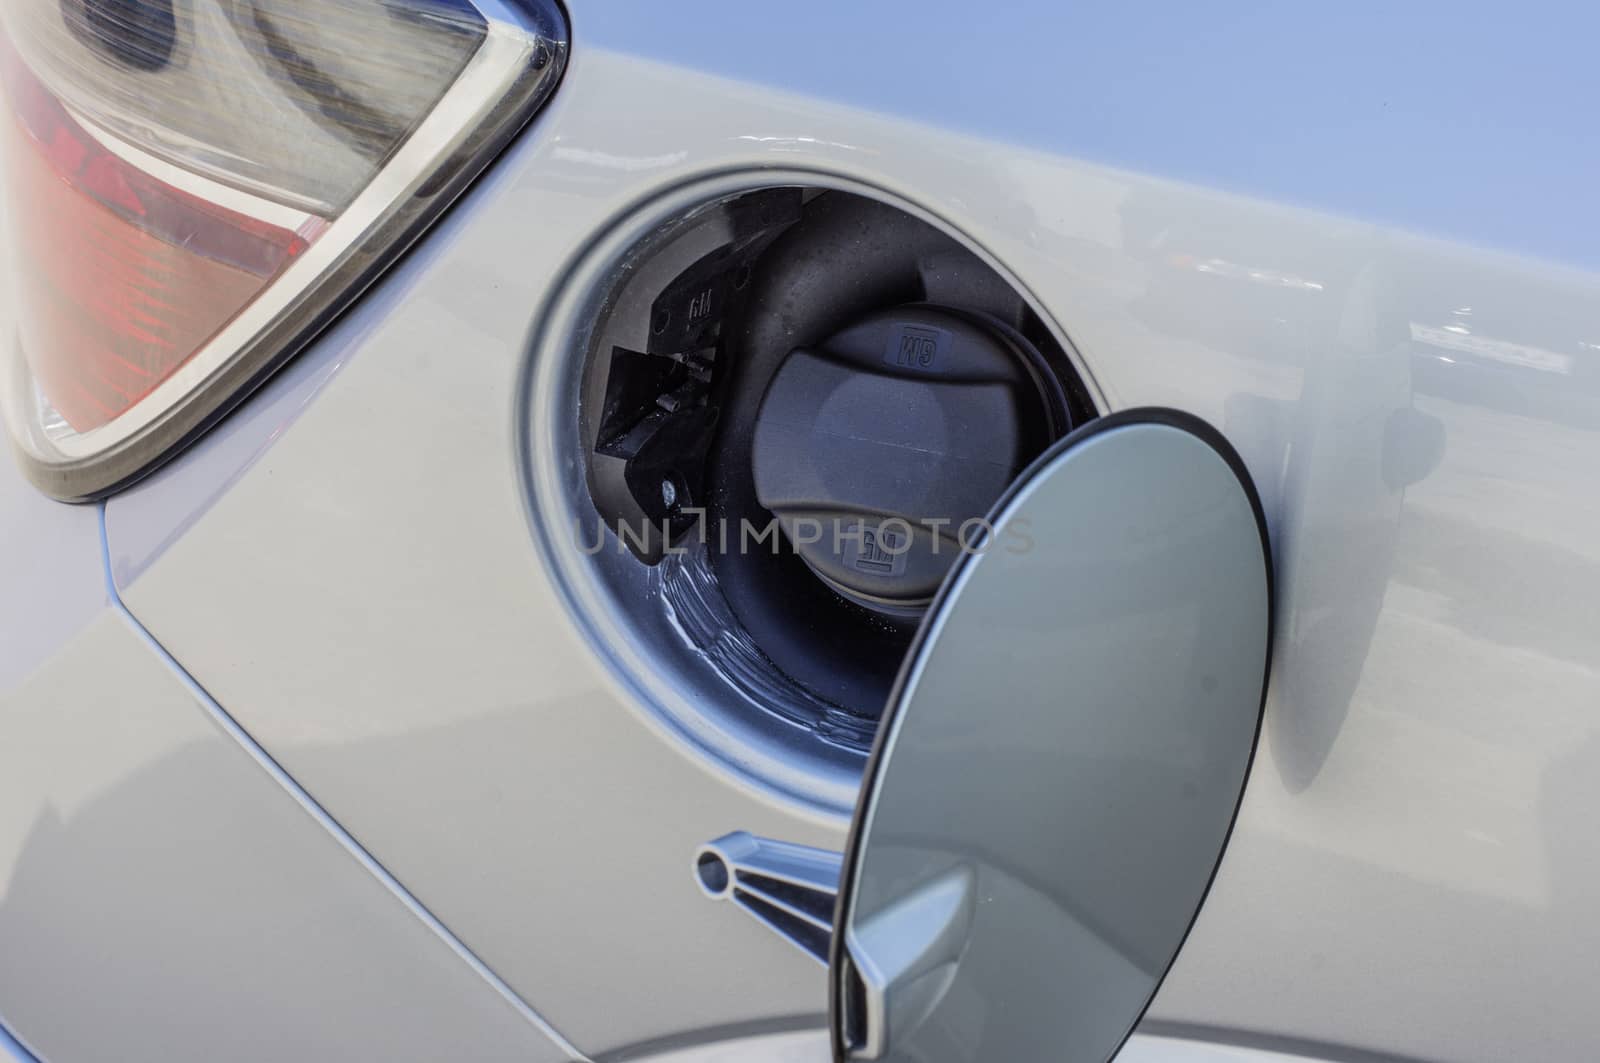 Car Gas Tank. For your commercial and editorial use by serhii_lohvyniuk